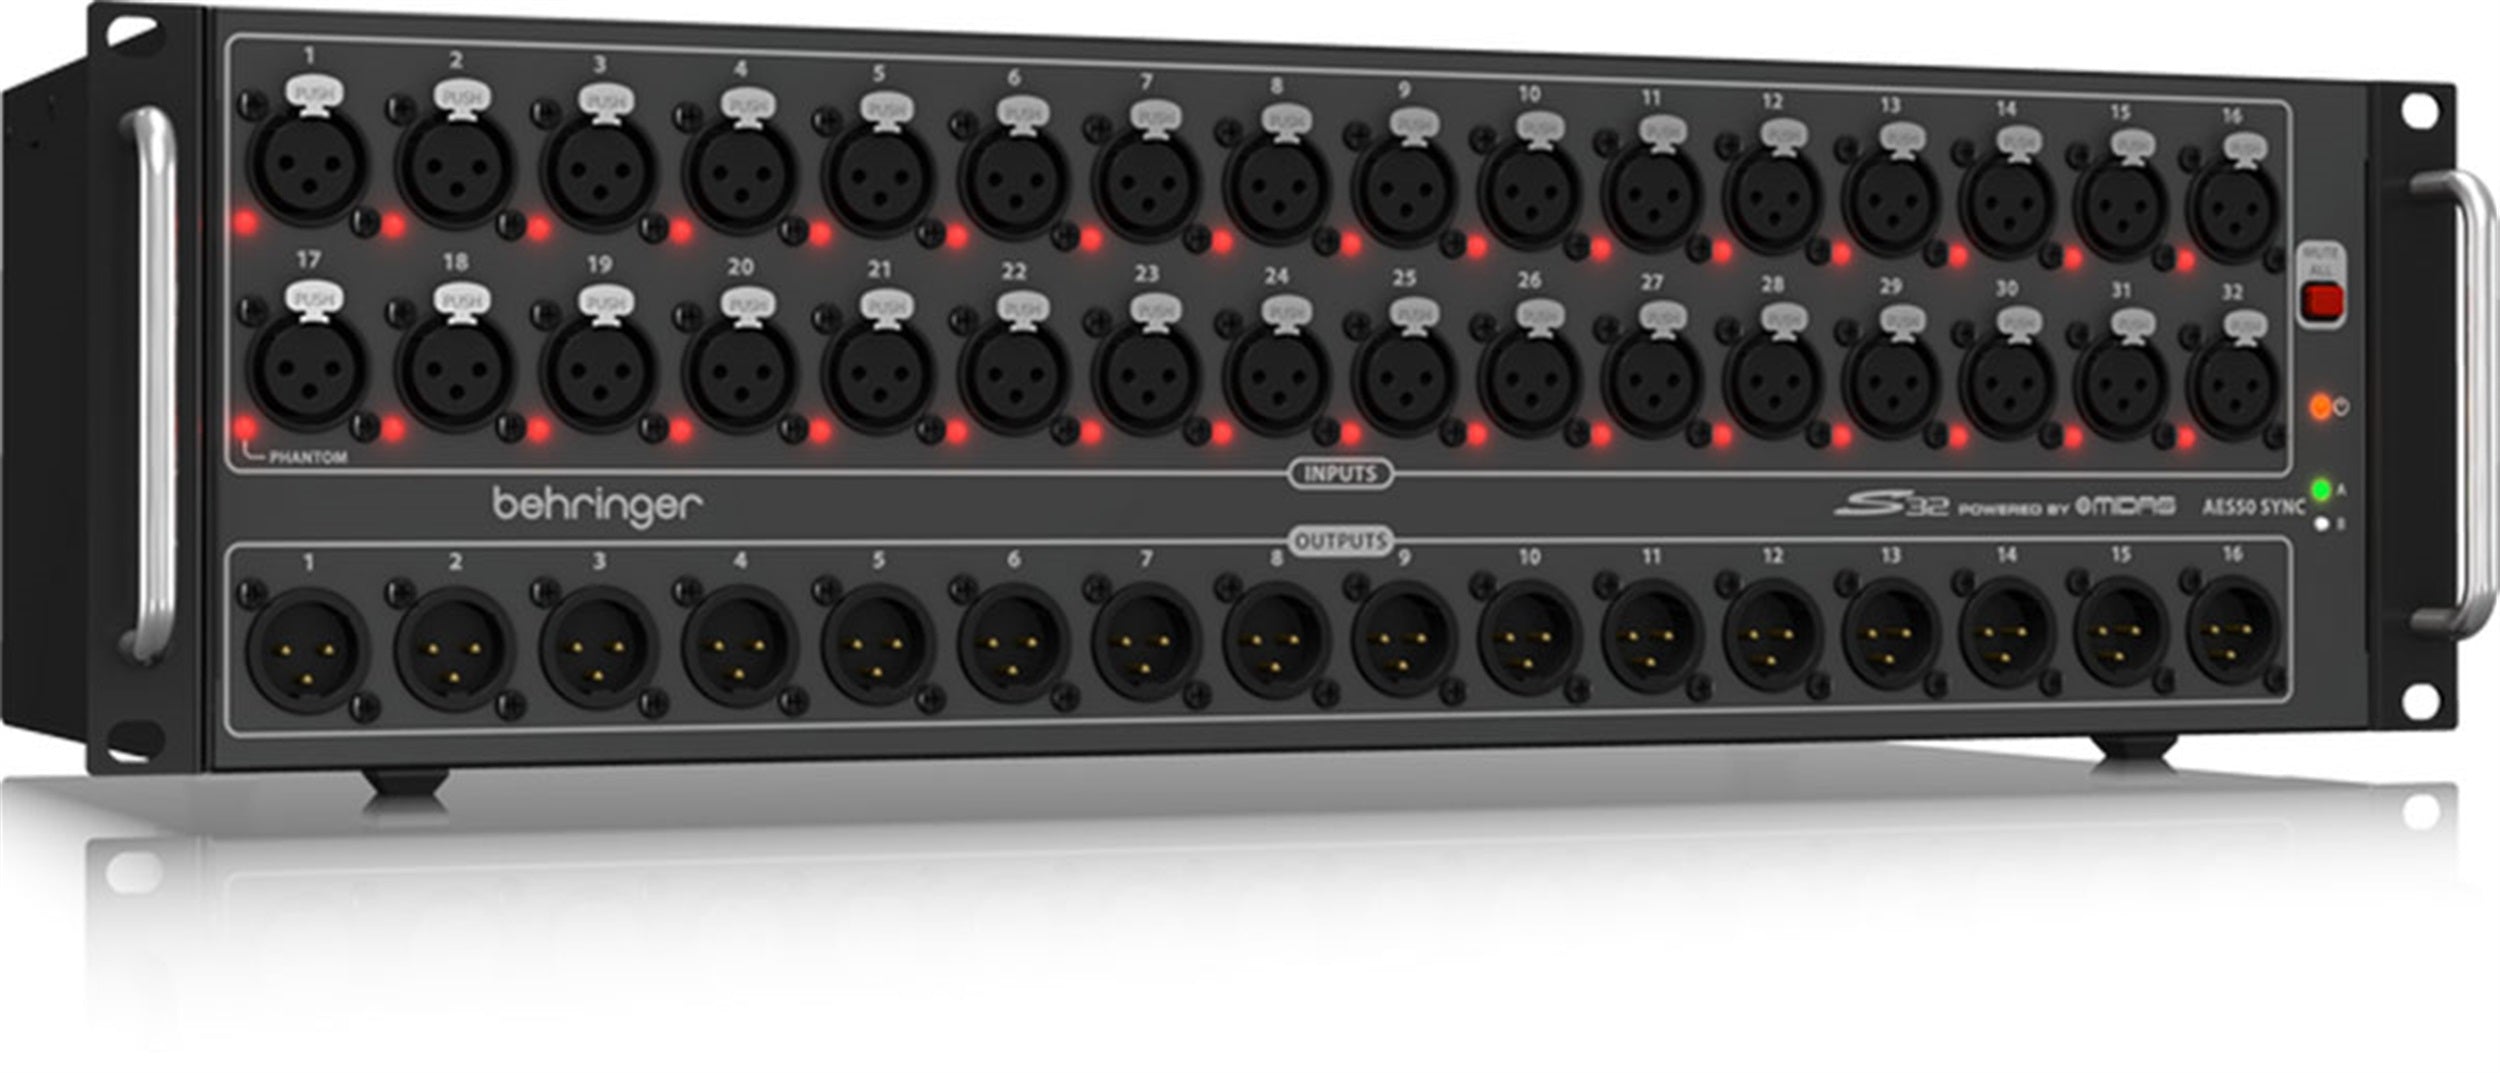 Behringer S32 Remote-Controllable Midas Preamps, With Networking SuperMAC Technology by Behringer